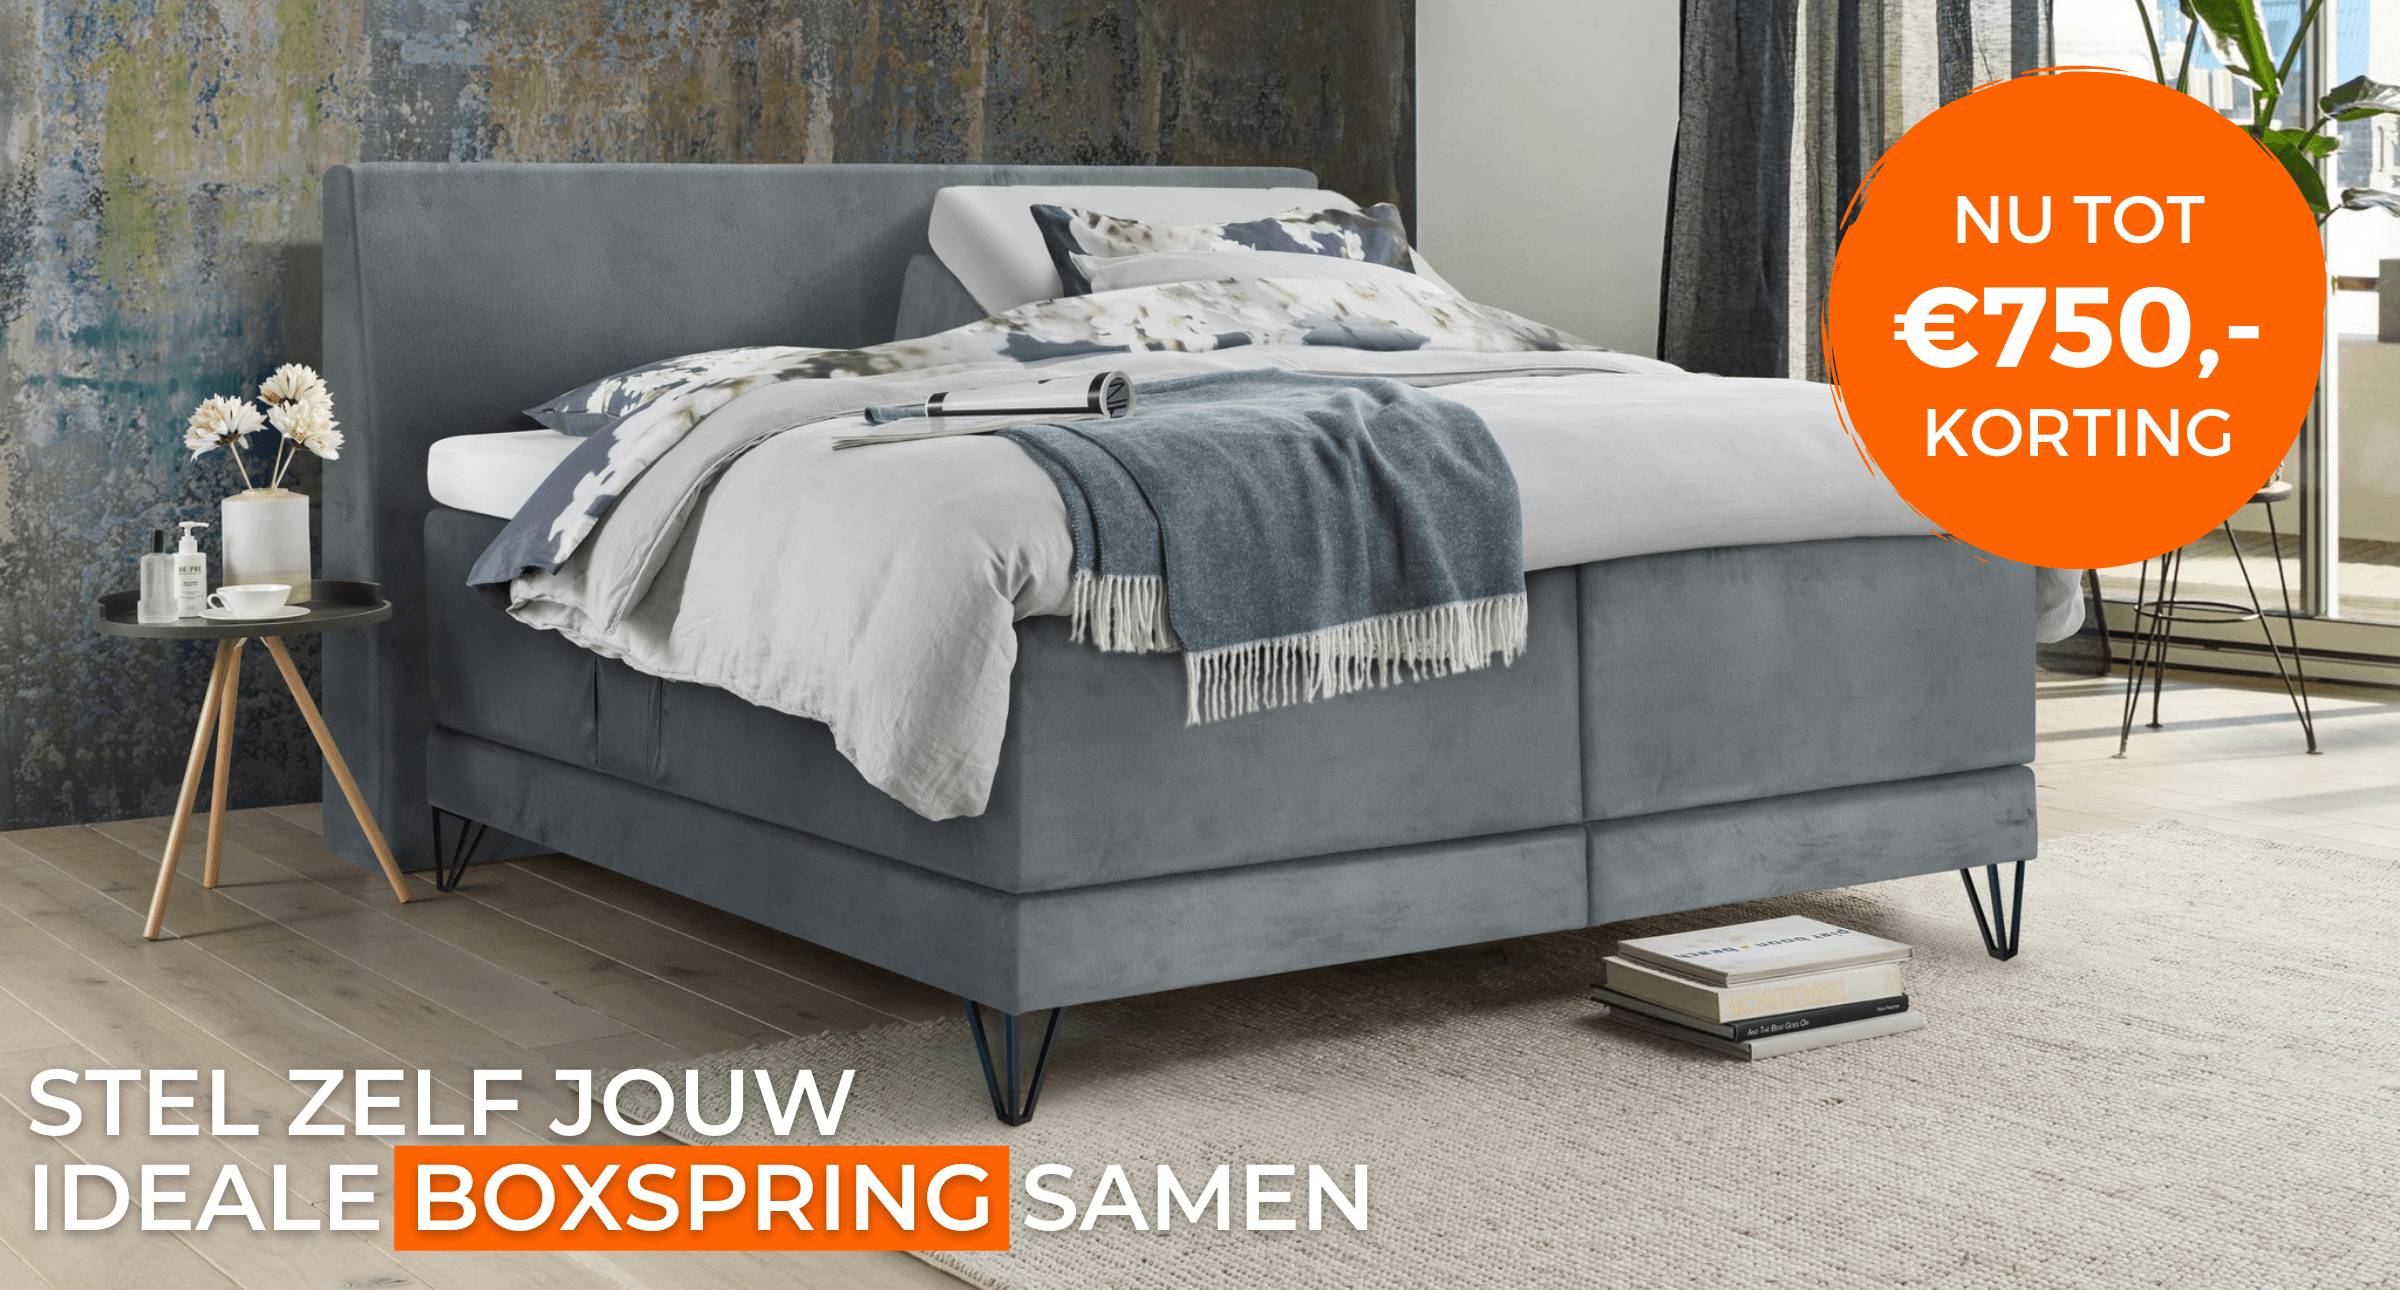 Overleving haat plotseling Boxspring Outlet | Tot 30% korting op boxsprings! | Beddenplein -  Beddenplein.nl